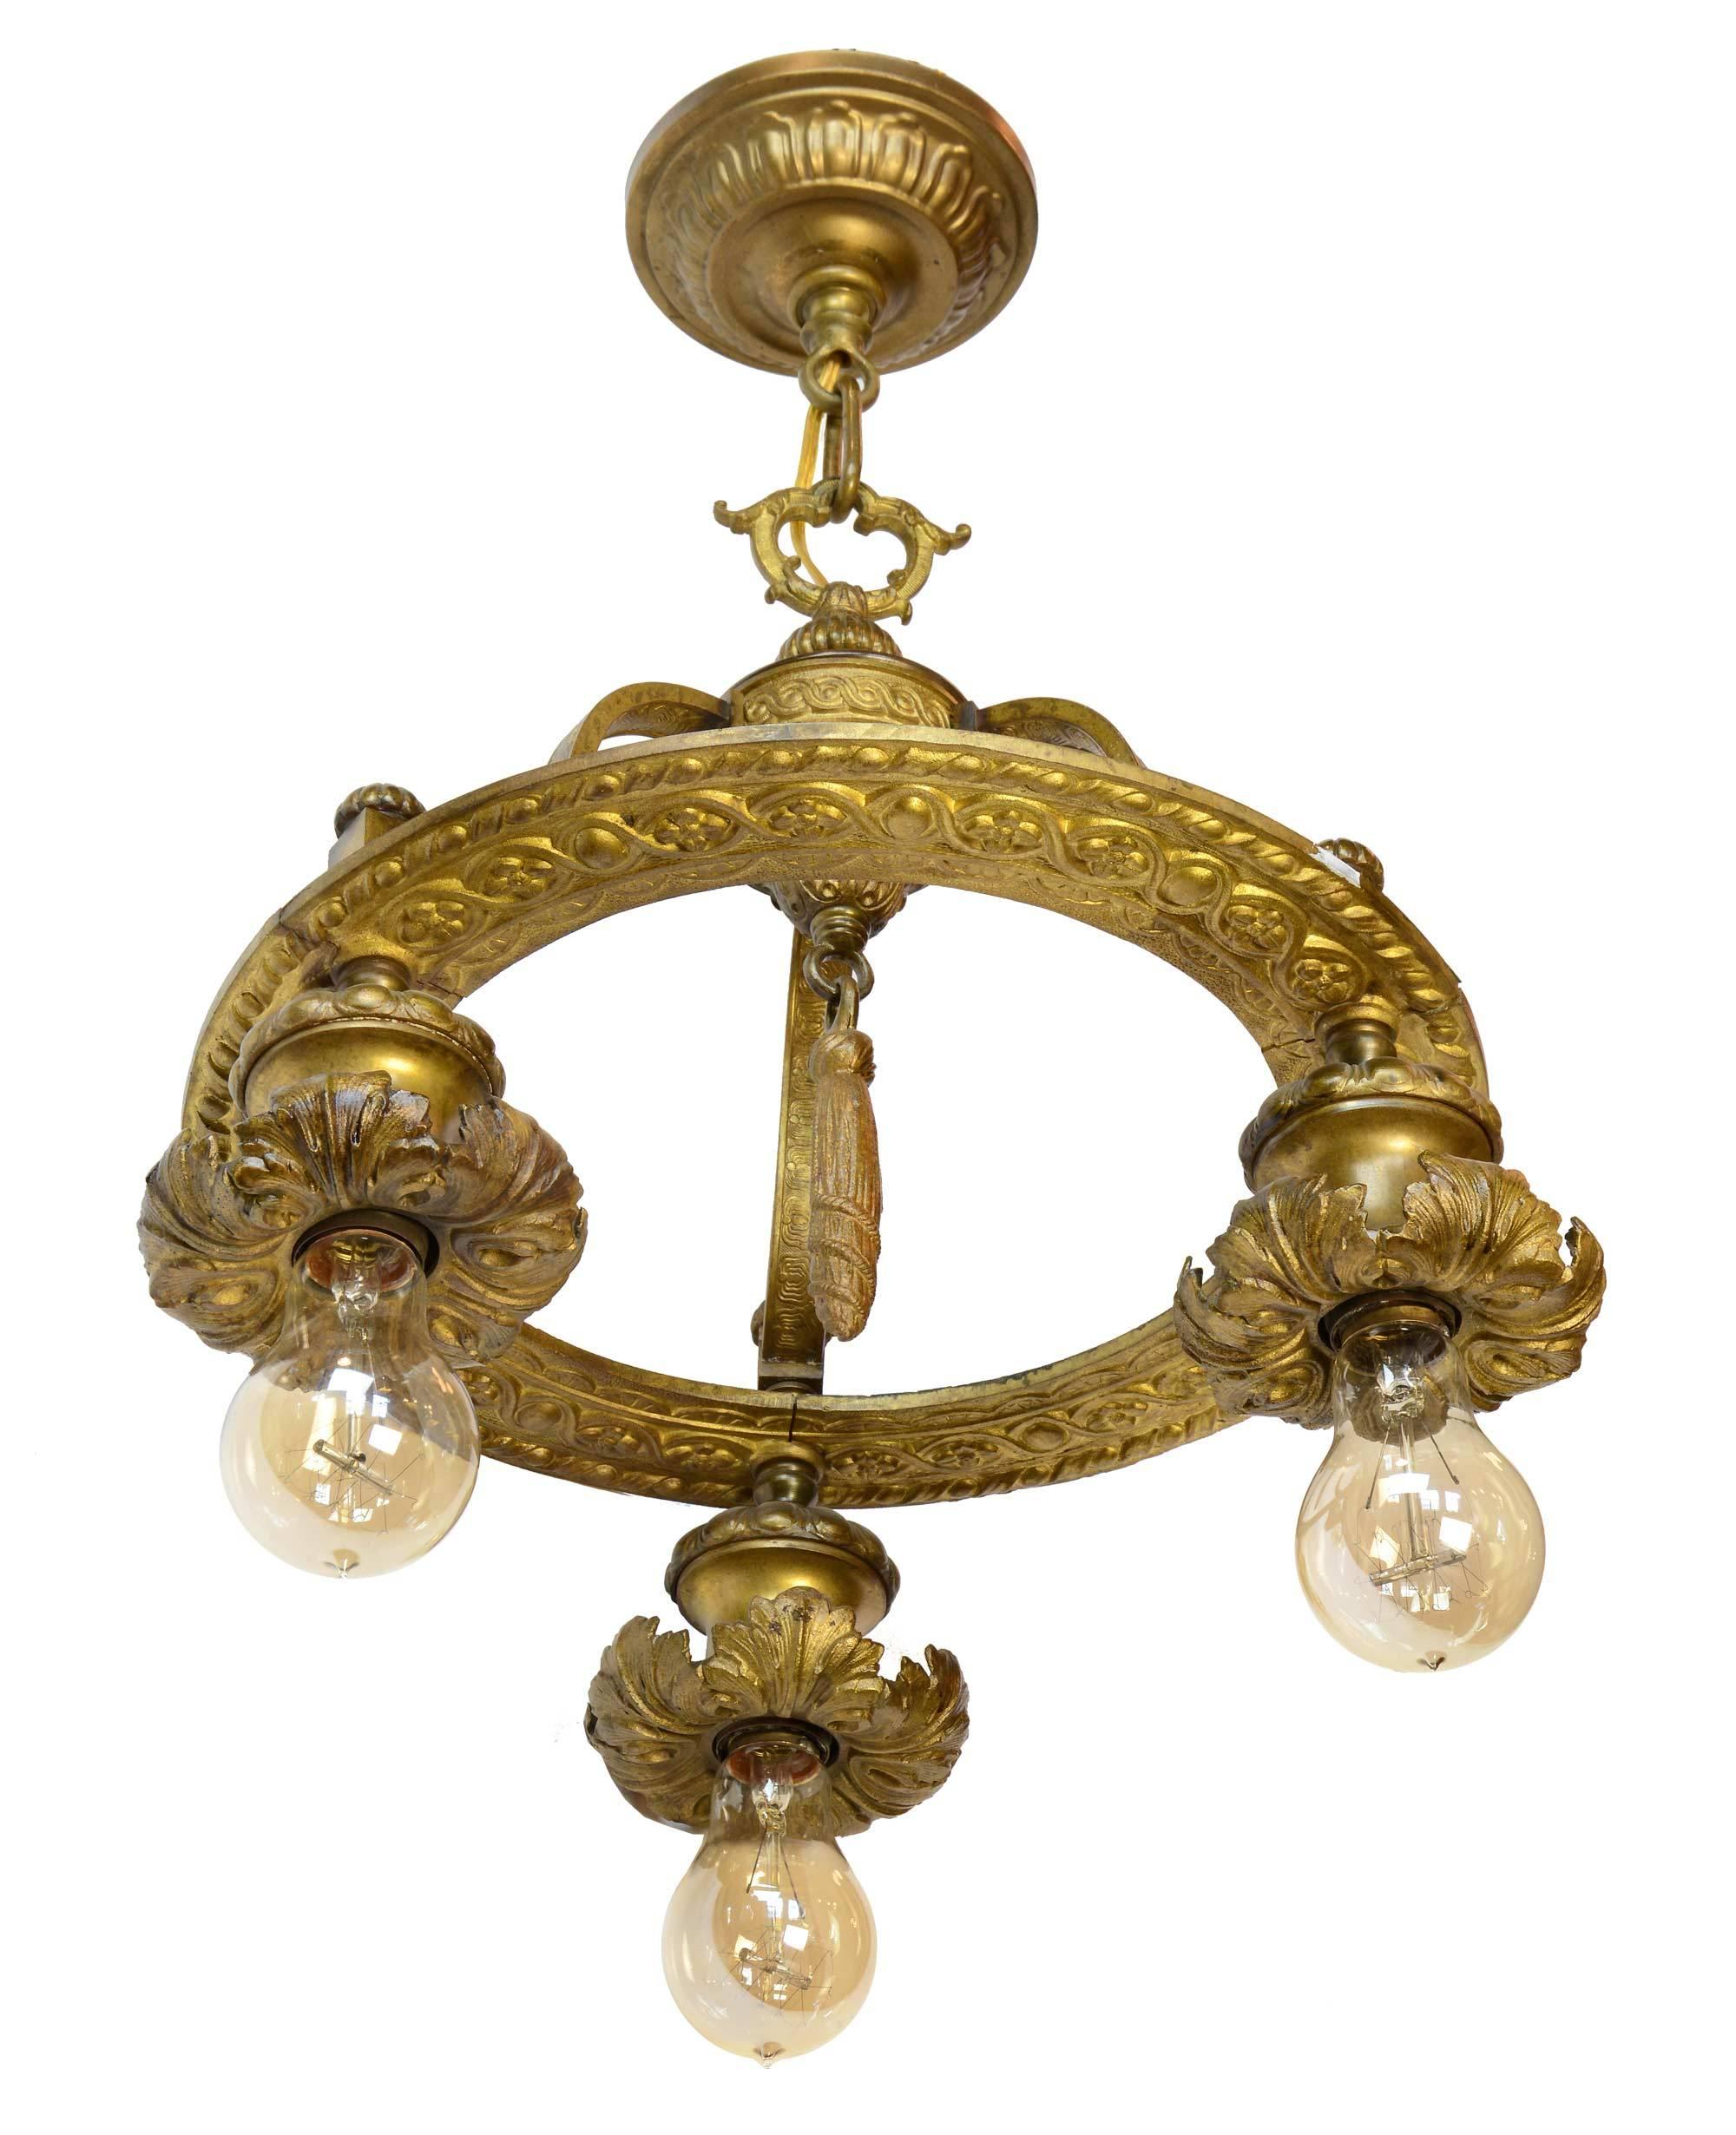 A highly ornamented cast brass ring light with Beaux Arts-style decoration, including floral and acanthus leaf detail, acorn finials, and a rope tassel in the center. This beautiful fixture, inspired by the French Beaux Arts movement, has three